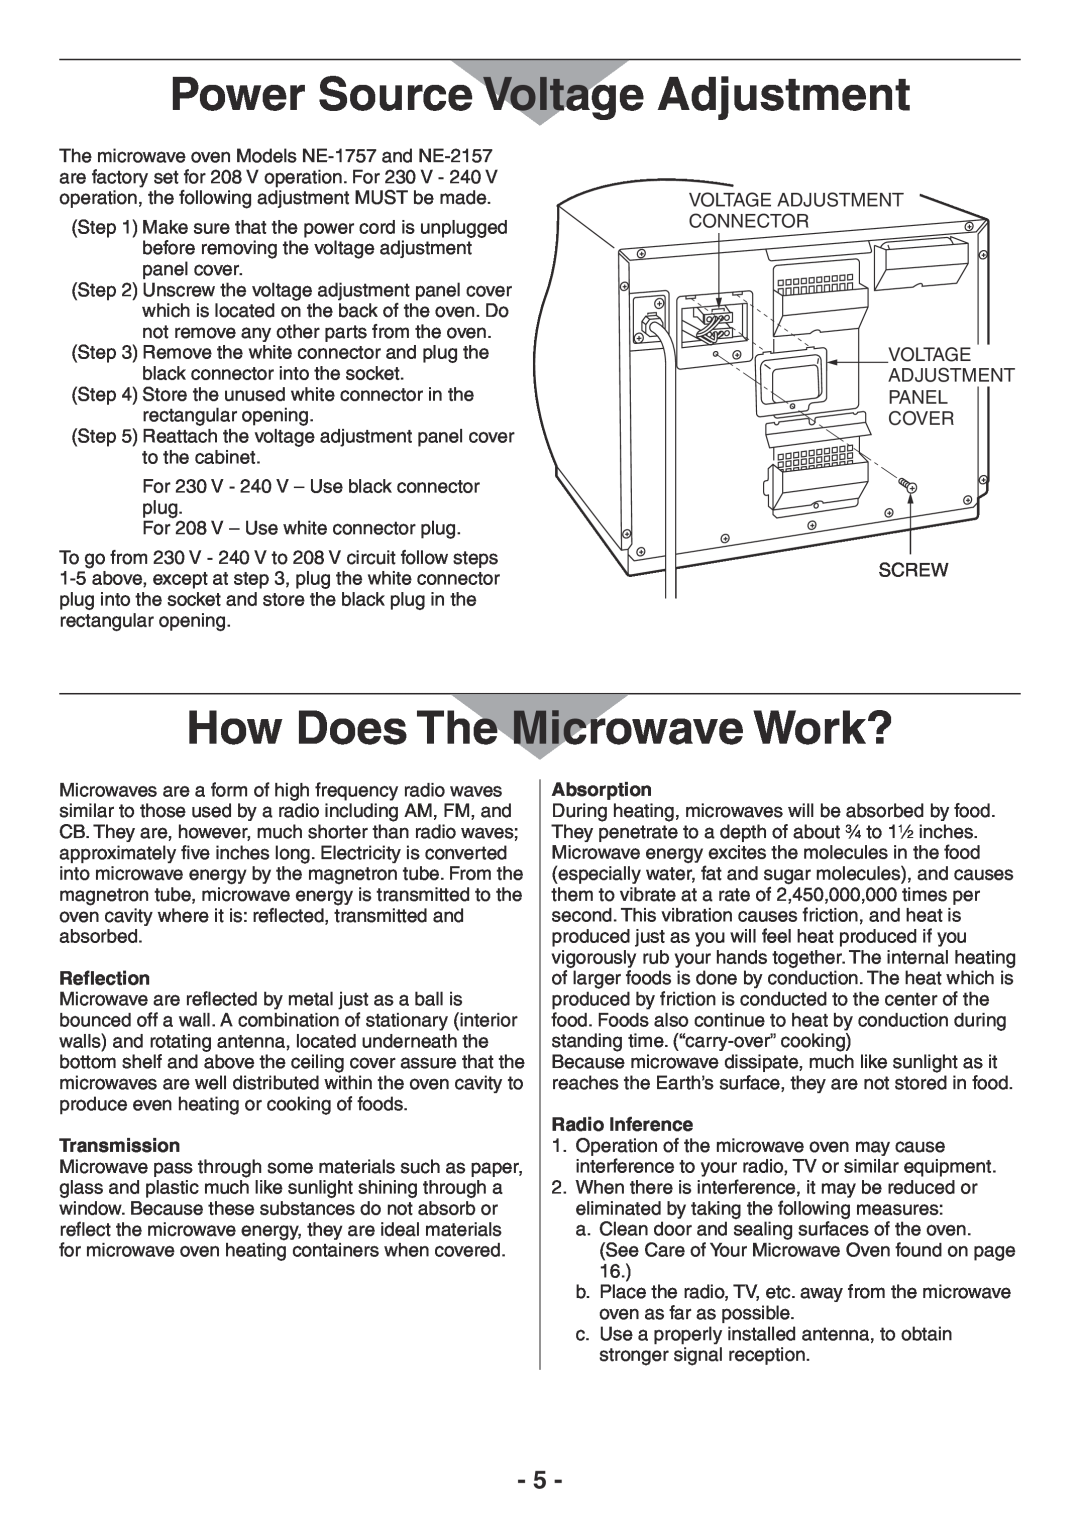 Panasonic NE-1757R Power Source Voltage Adjustment, How Does The Microwave Work?, Reflection, Transmission, Absorption 